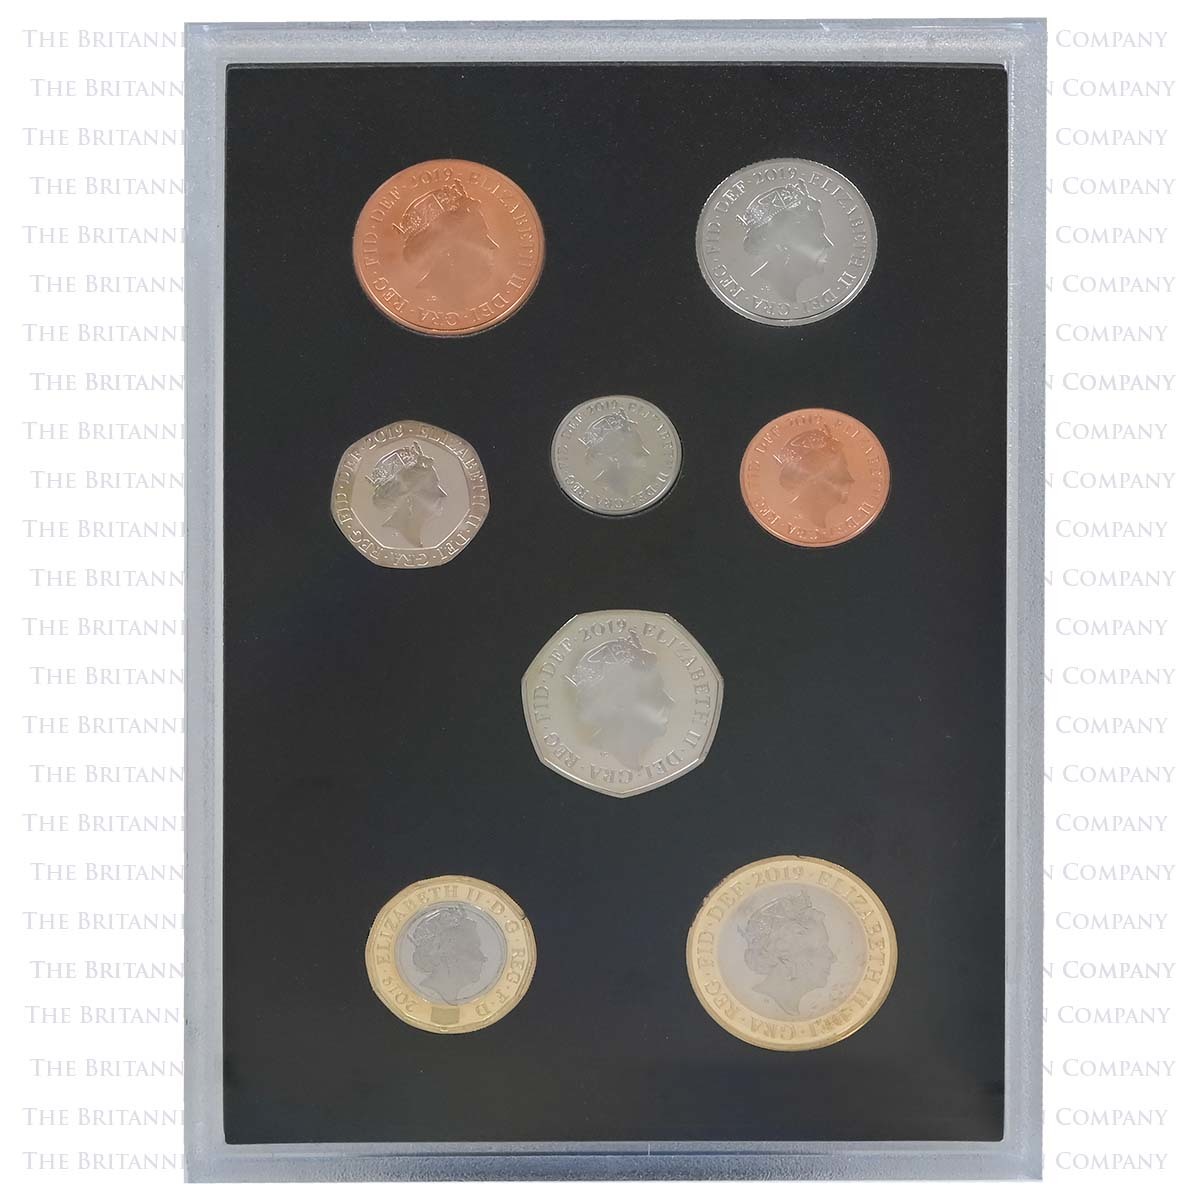 2019-proof-coin-set-collector-edtition-005-m